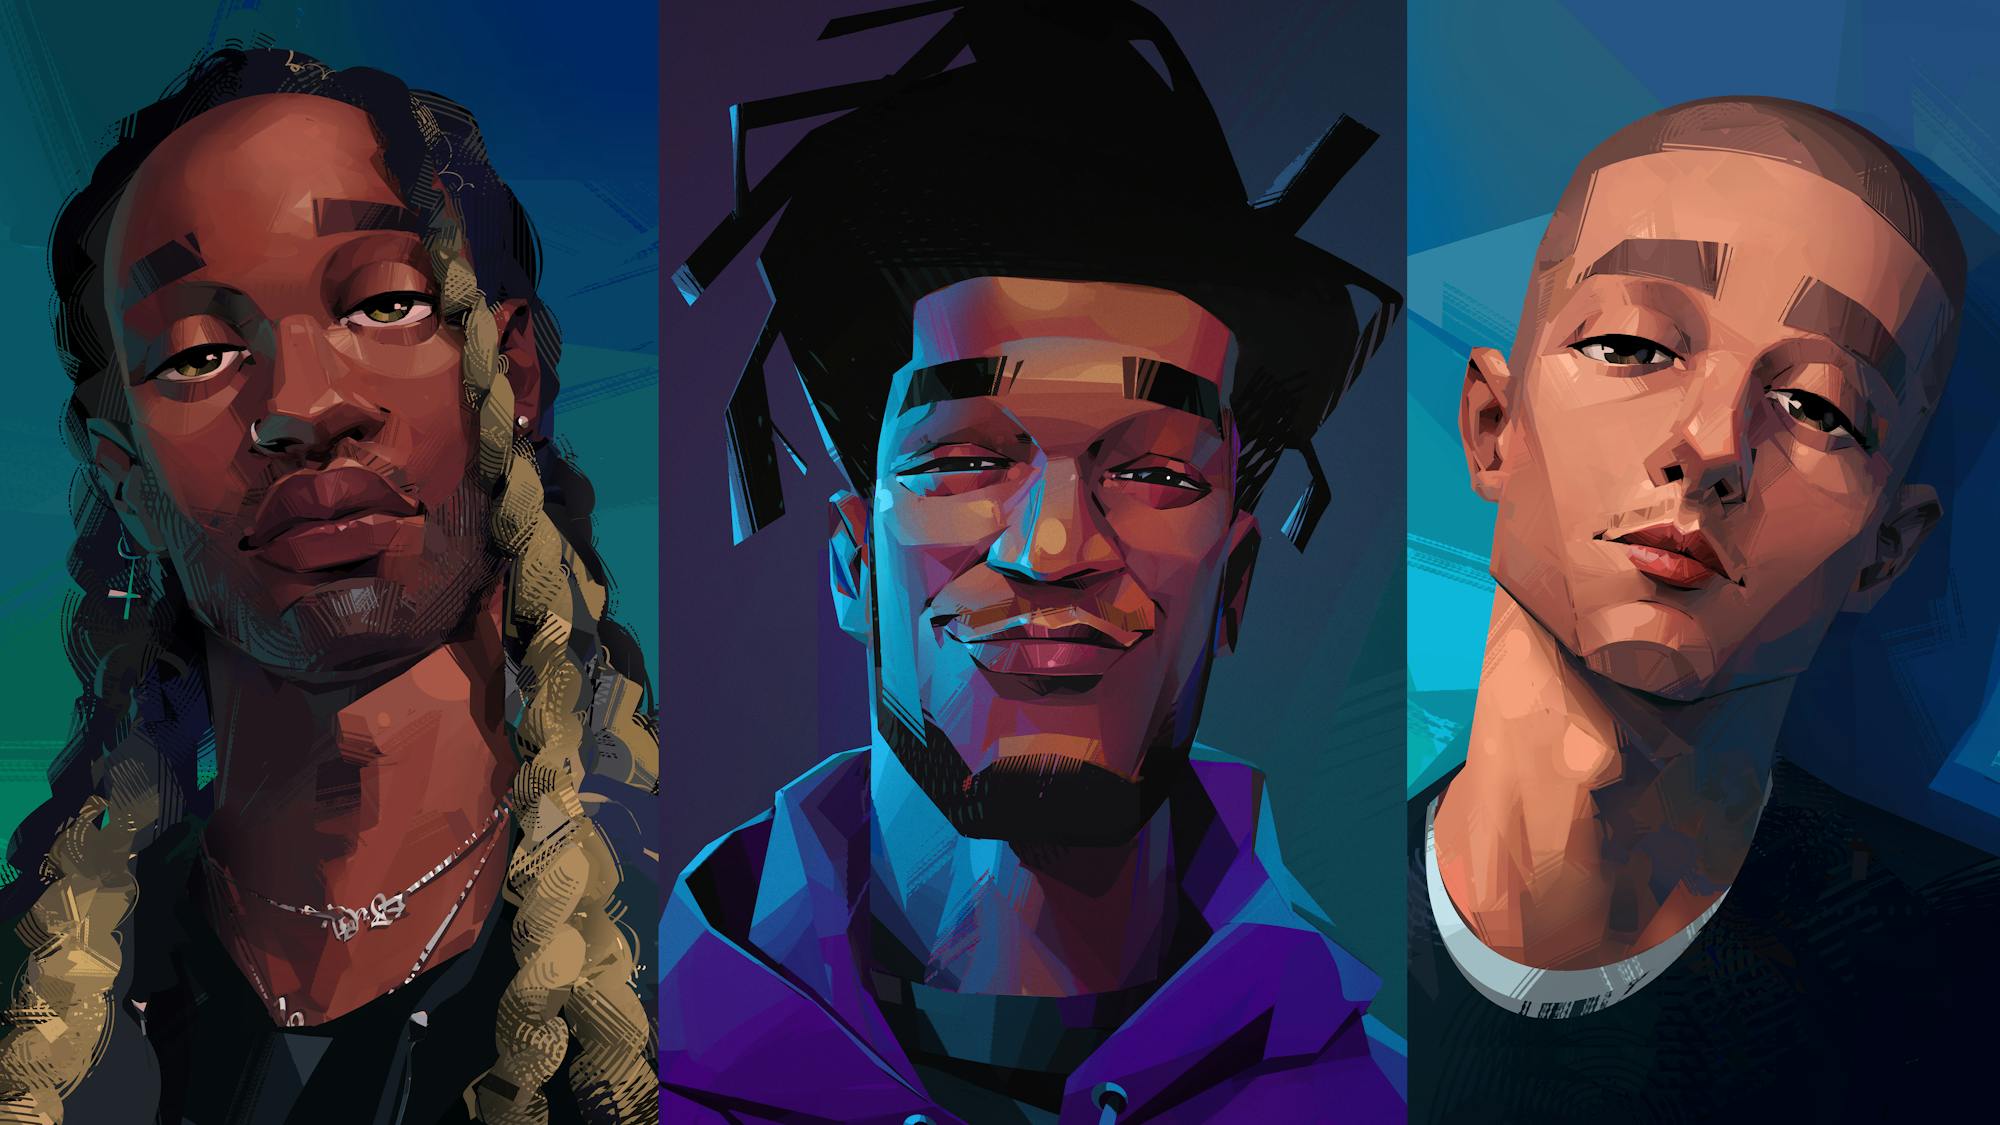 Ky (Ty Dolla $ign), Jabari (Scott Mescudi), and Jimmy (Timothée Chalamet) in a triptych.